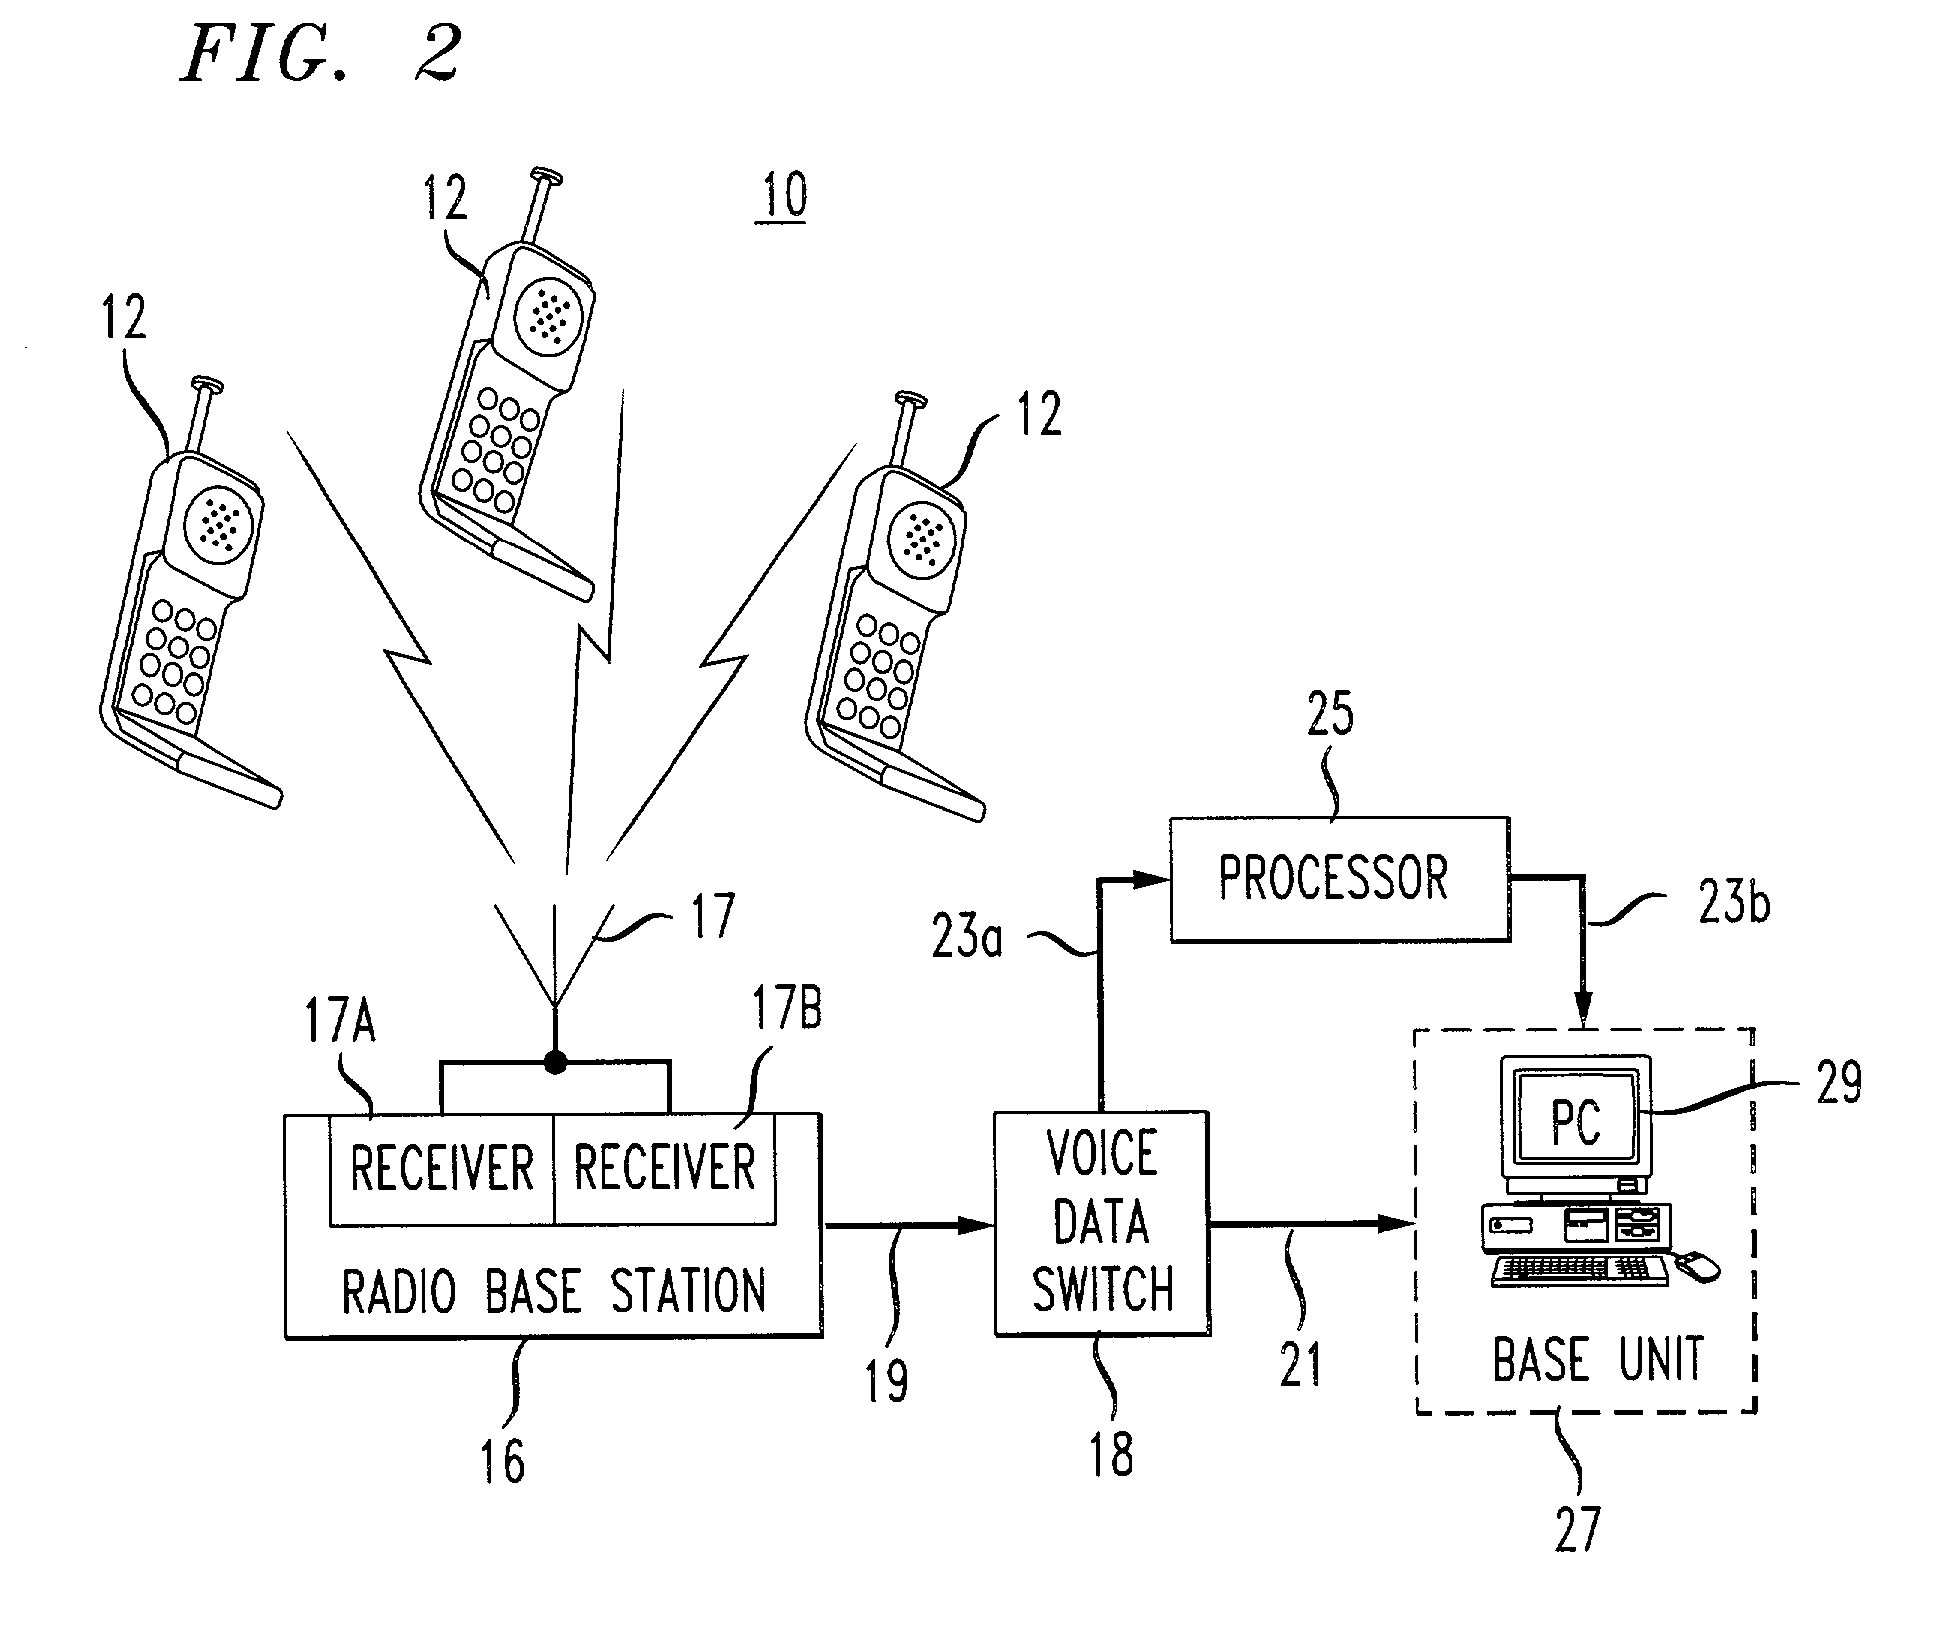 Monitoring network performance using individual cell phone location and performance information